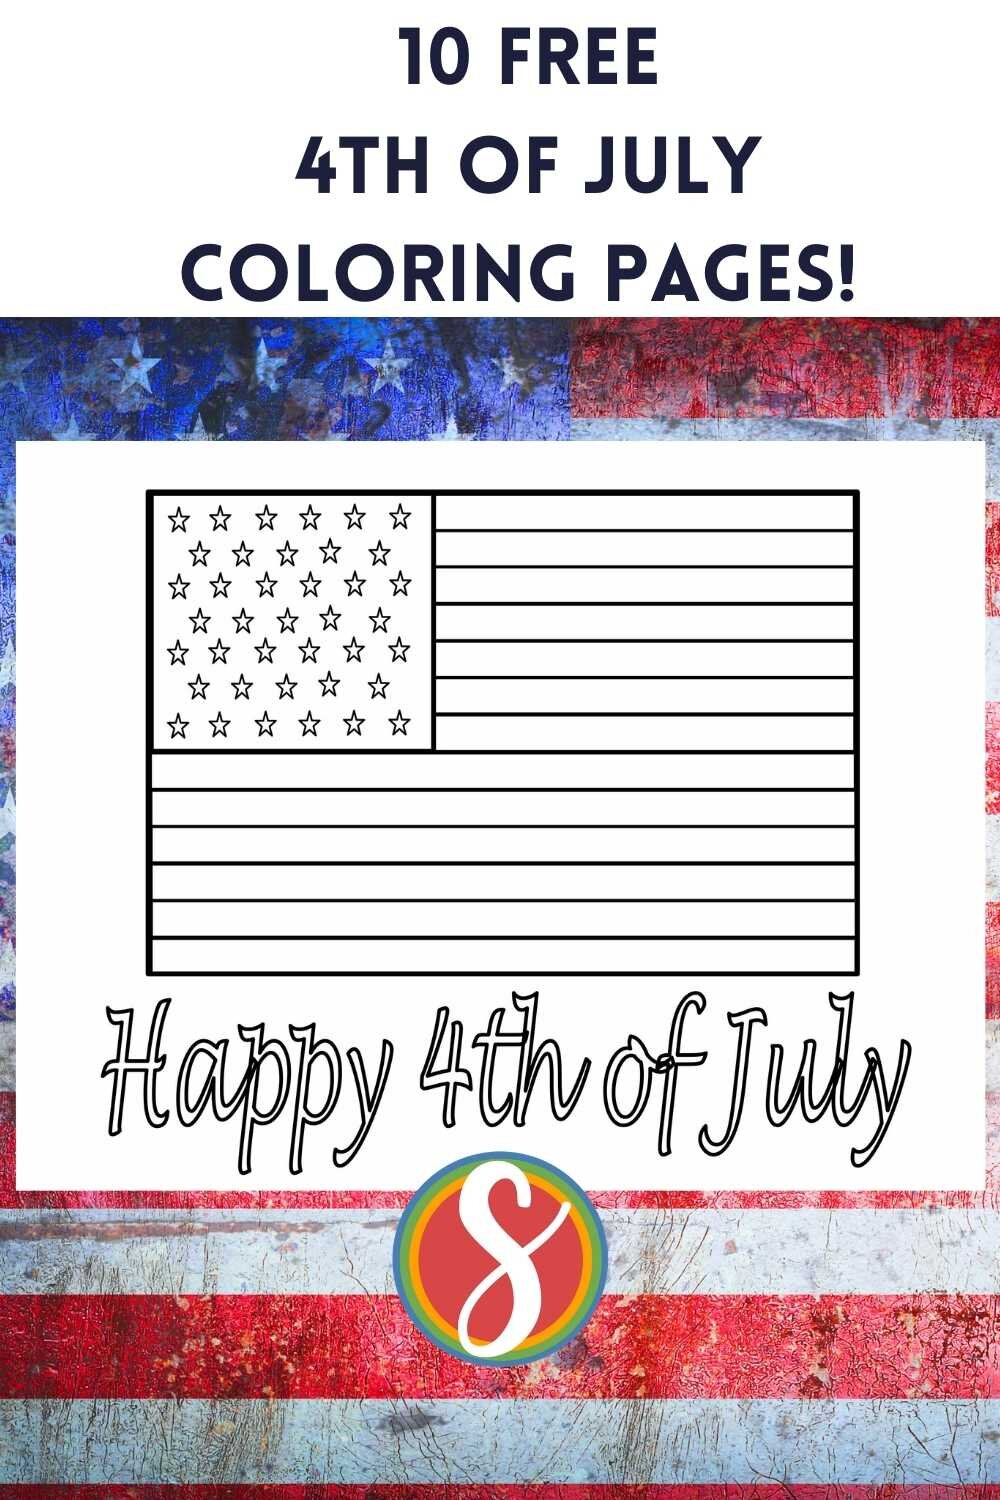 Free printable 4th of July coloring page from Stevie Doodles